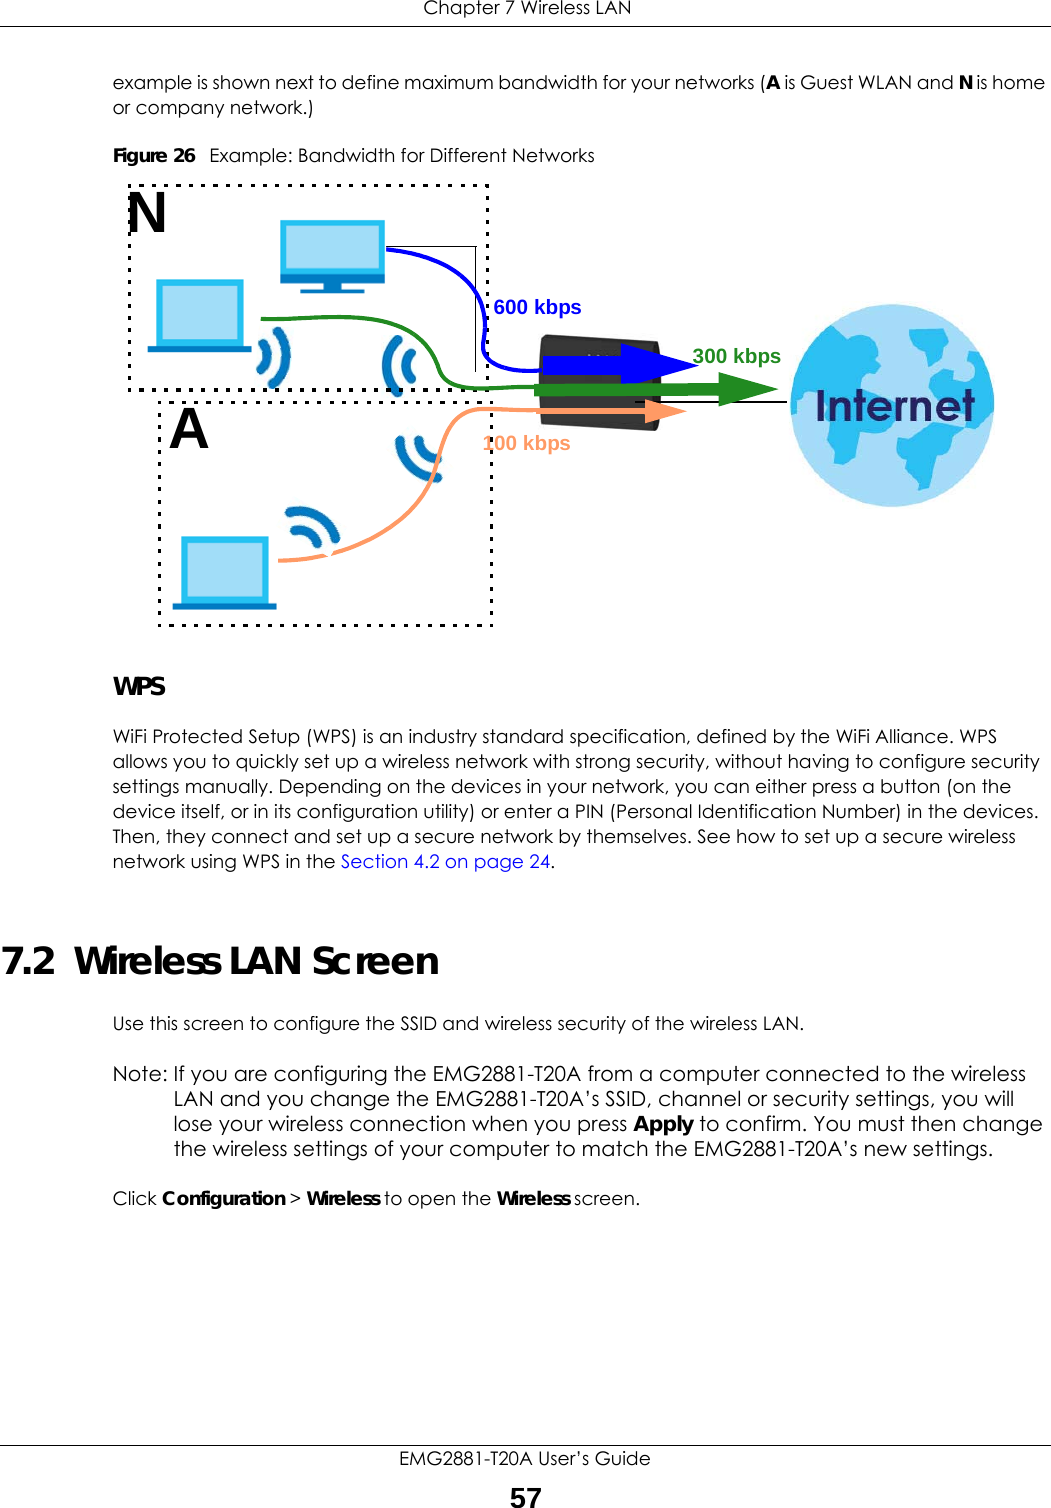  Chapter 7 Wireless LANEMG2881-T20A User’s Guide57example is shown next to define maximum bandwidth for your networks (A is Guest WLAN and N is home or company network.)Figure 26   Example: Bandwidth for Different NetworksWPSWiFi Protected Setup (WPS) is an industry standard specification, defined by the WiFi Alliance. WPS allows you to quickly set up a wireless network with strong security, without having to configure security settings manually. Depending on the devices in your network, you can either press a button (on the device itself, or in its configuration utility) or enter a PIN (Personal Identification Number) in the devices. Then, they connect and set up a secure network by themselves. See how to set up a secure wireless network using WPS in the Section 4.2 on page 24. 7.2  Wireless LAN Screen Use this screen to configure the SSID and wireless security of the wireless LAN.Note: If you are configuring the EMG2881-T20A from a computer connected to the wireless LAN and you change the EMG2881-T20A’s SSID, channel or security settings, you will lose your wireless connection when you press Apply to confirm. You must then change the wireless settings of your computer to match the EMG2881-T20A’s new settings.Click Configuration &gt; Wireless to open the Wireless screen.600 kbps100 kbps300 kbpsNA